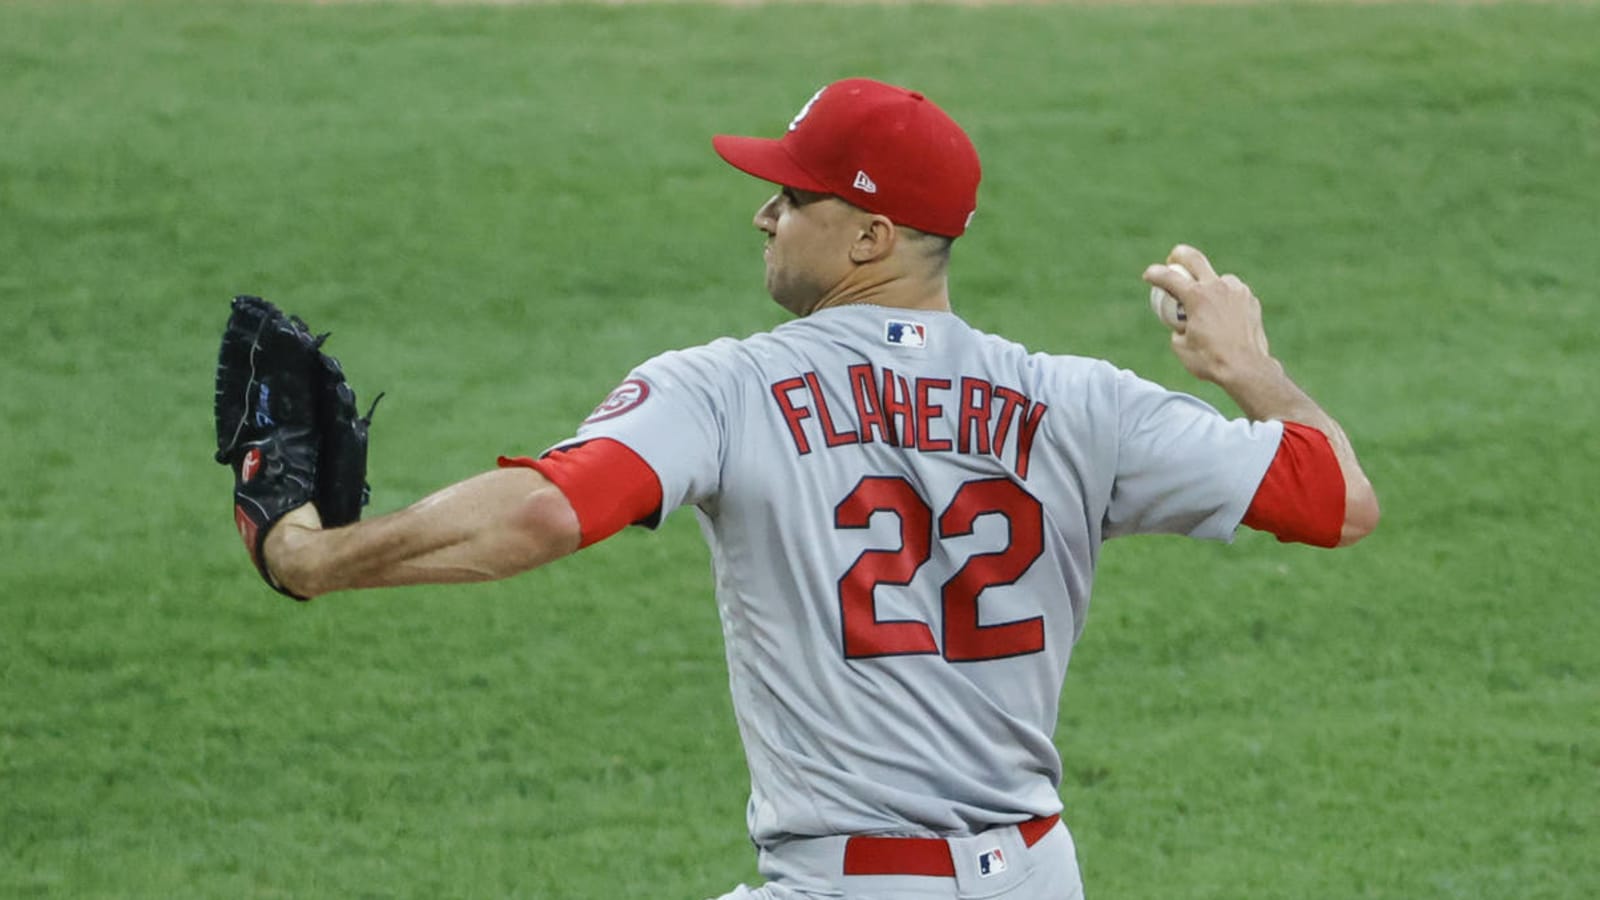 Jack Flaherty seems to take issue with umpires over hat